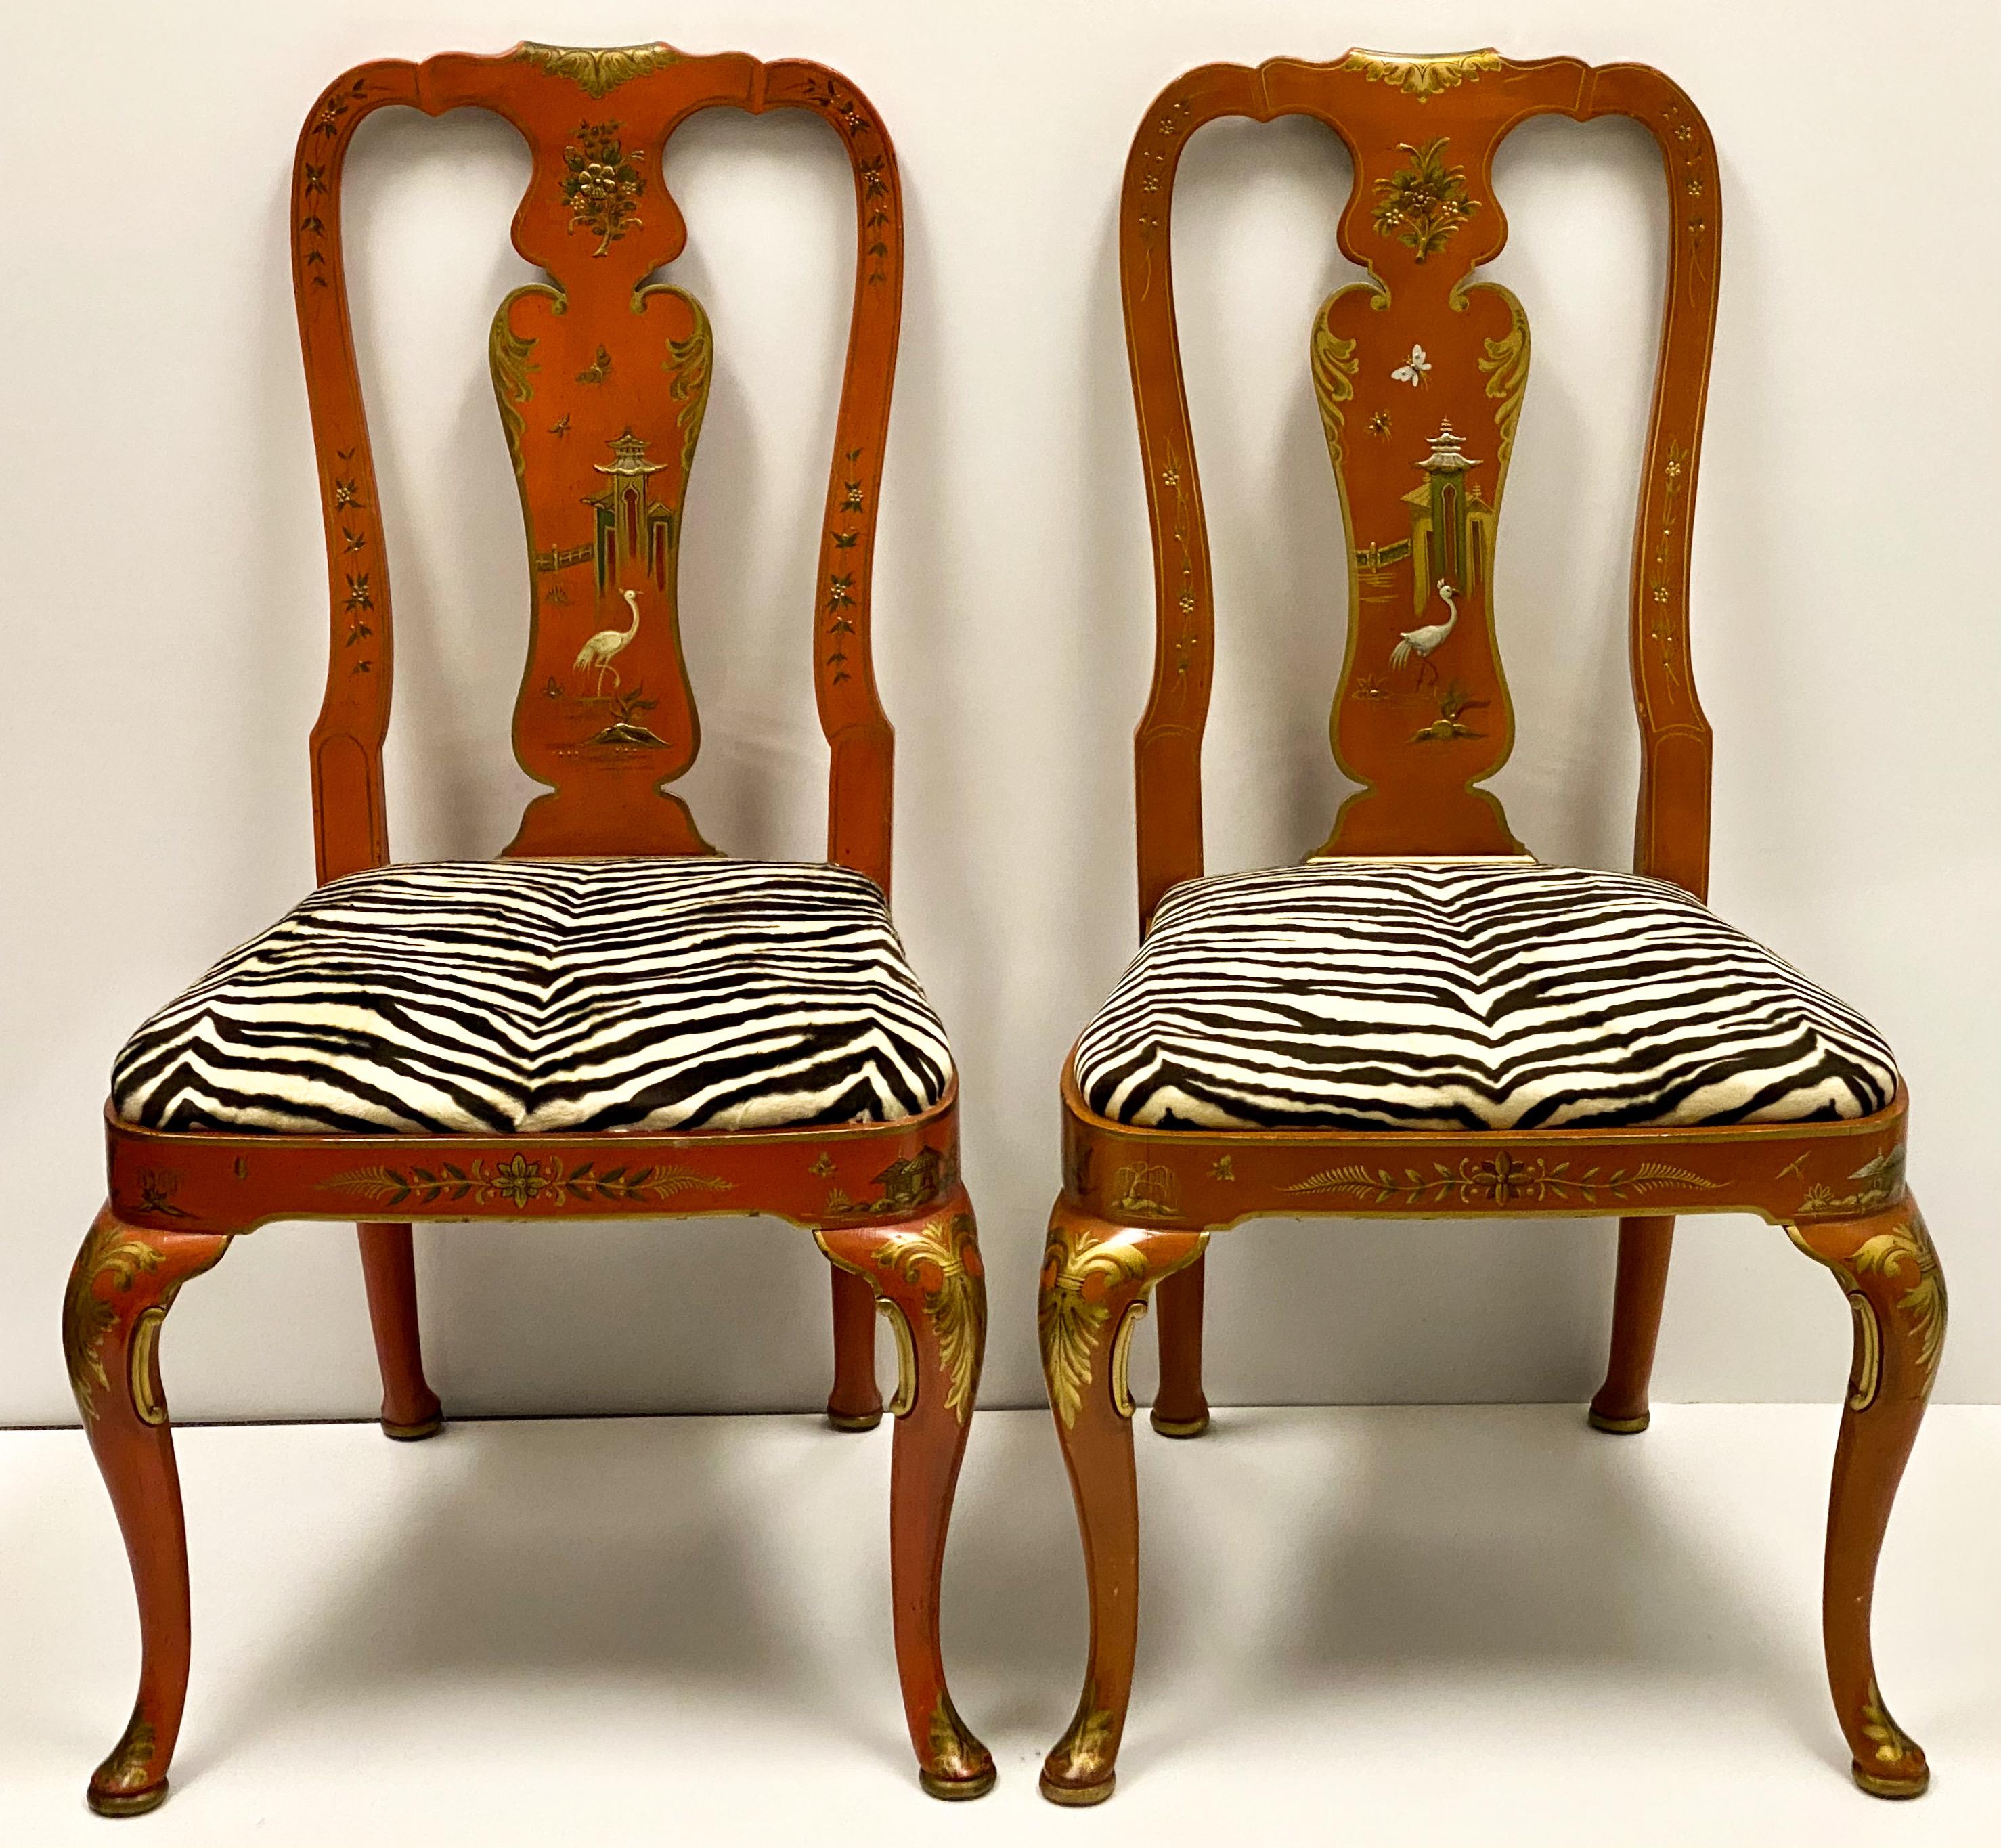 Wood Orange Chinoiserie Queen Anne Side Chairs by Kindel Furniture, Pair